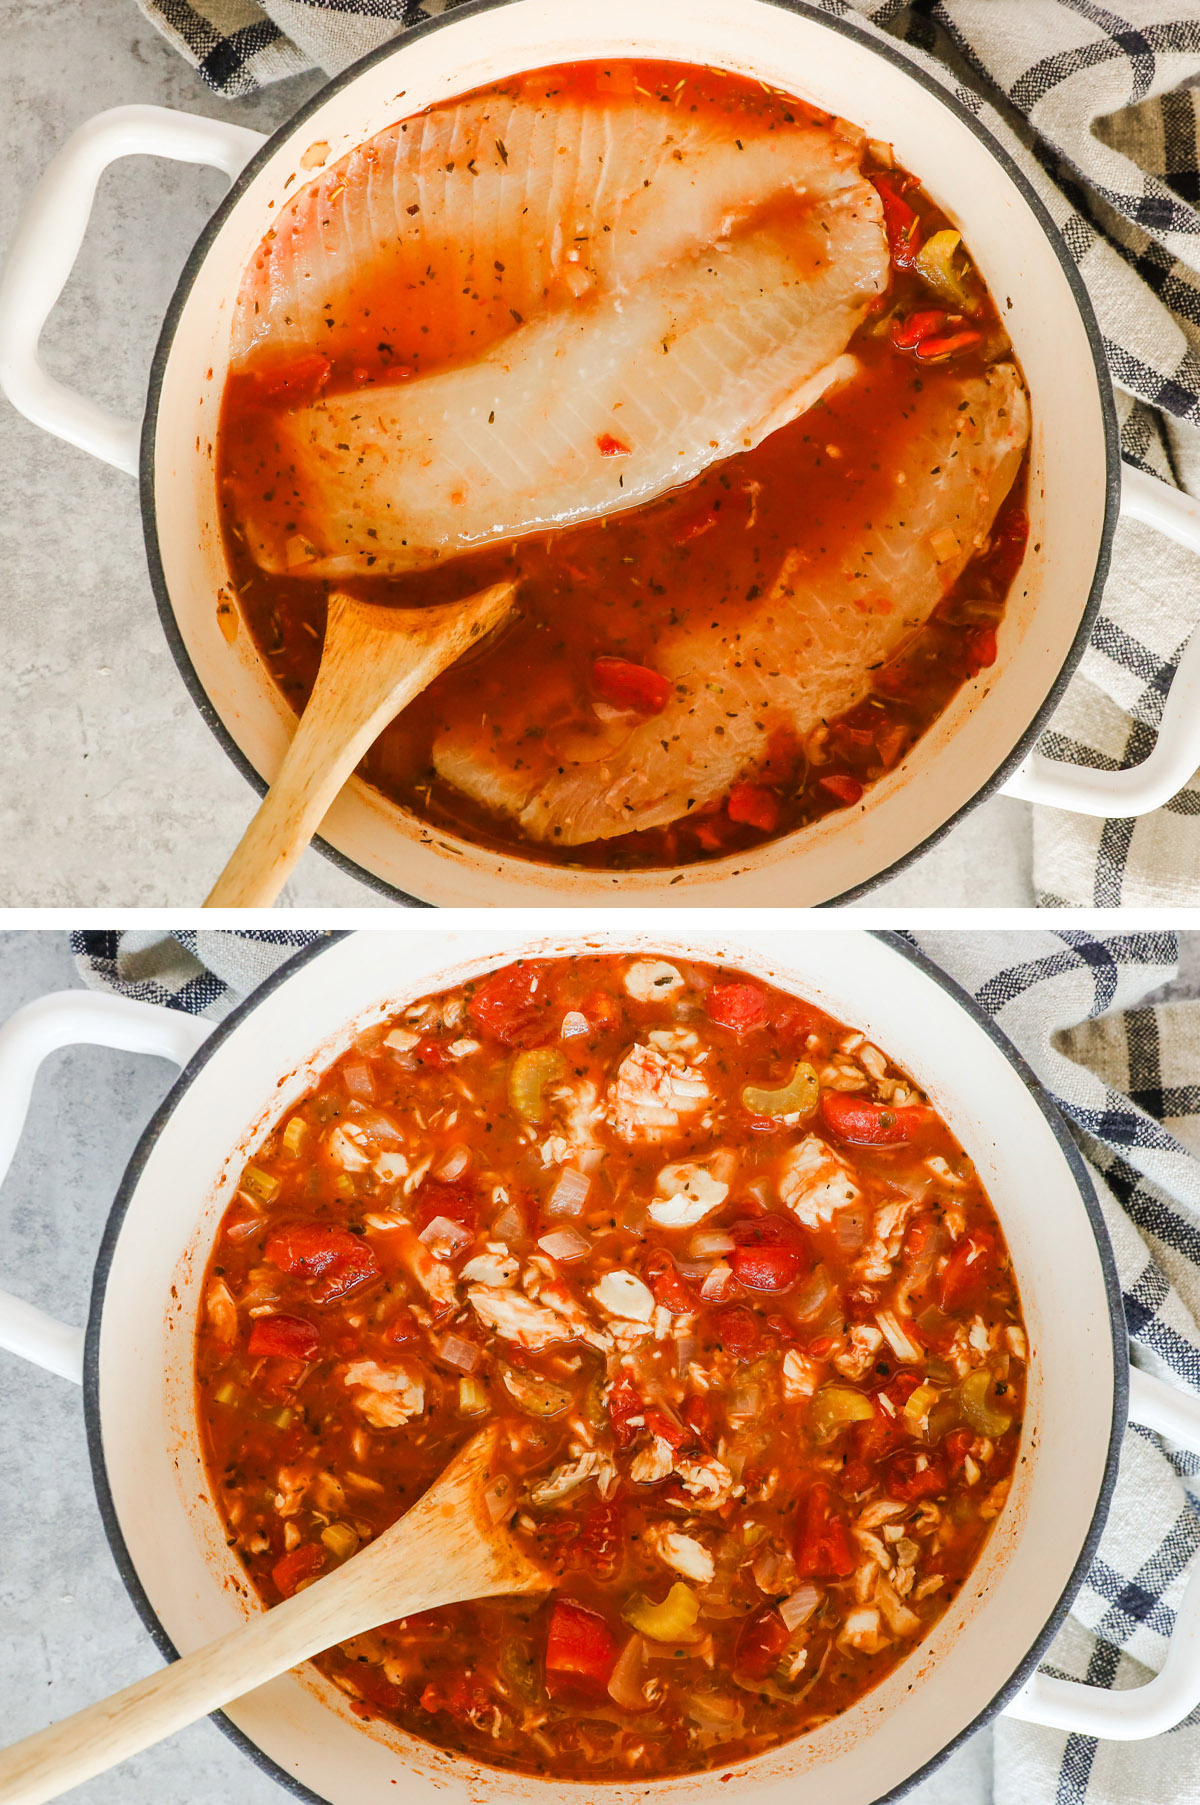 Two images of soup in a pot. First with raw fish fillets dumped into a tomato soup base. Second is fish pieces broken apart in the soup.